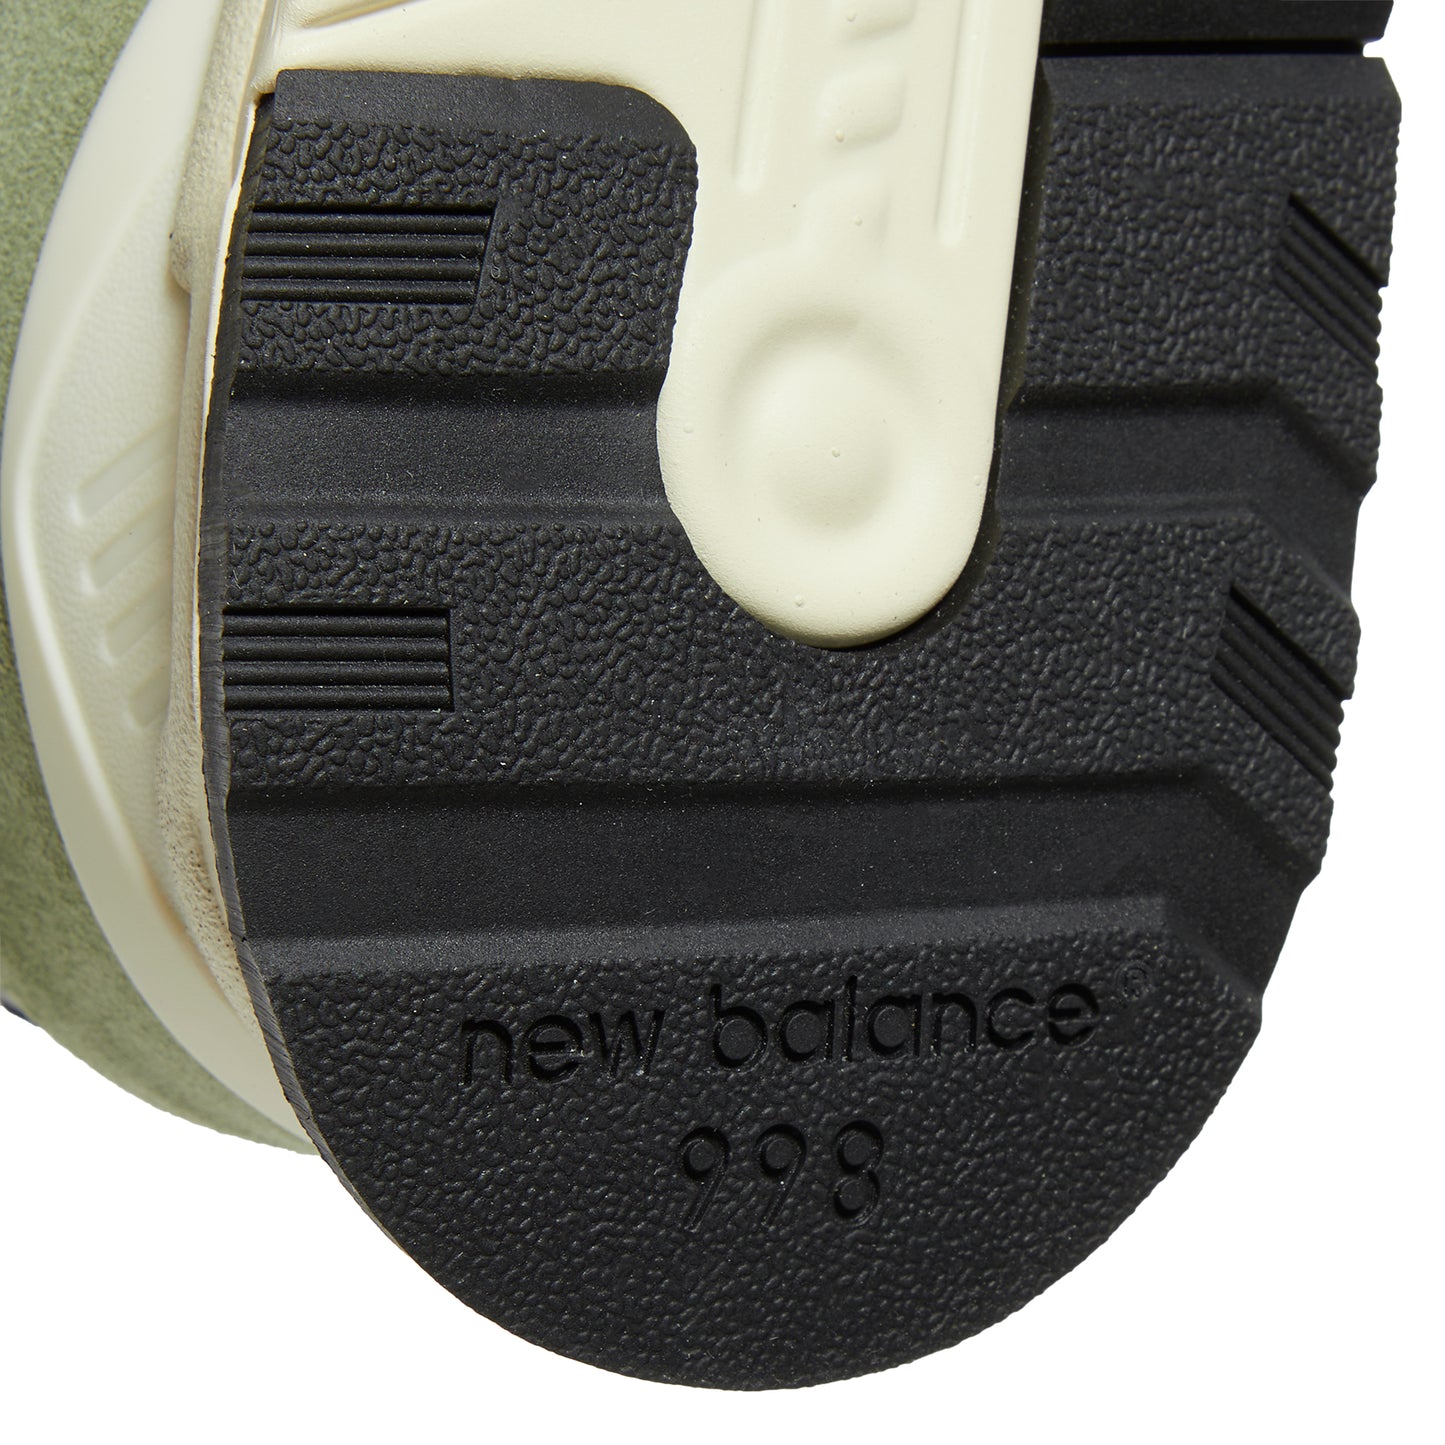 New Balance Made in USA 998 (Olive)